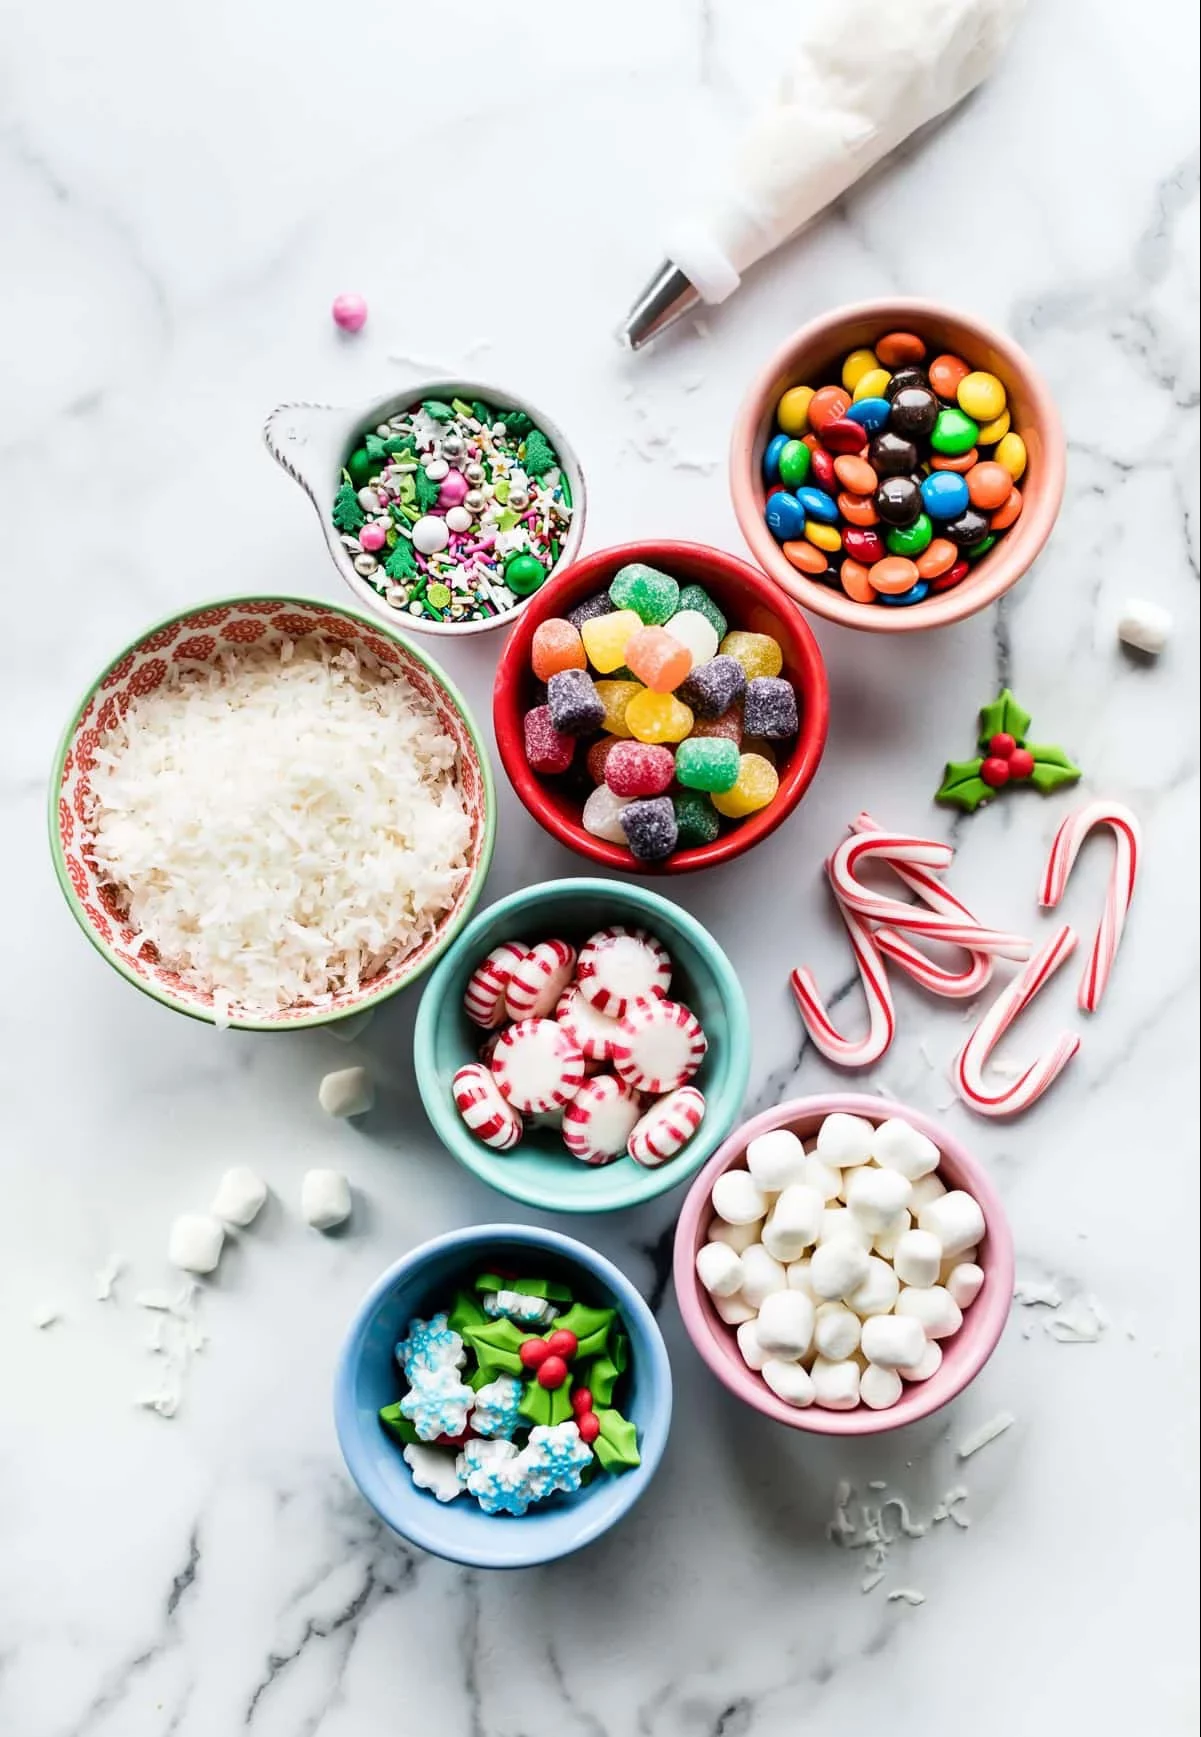 candies for gingerbread house